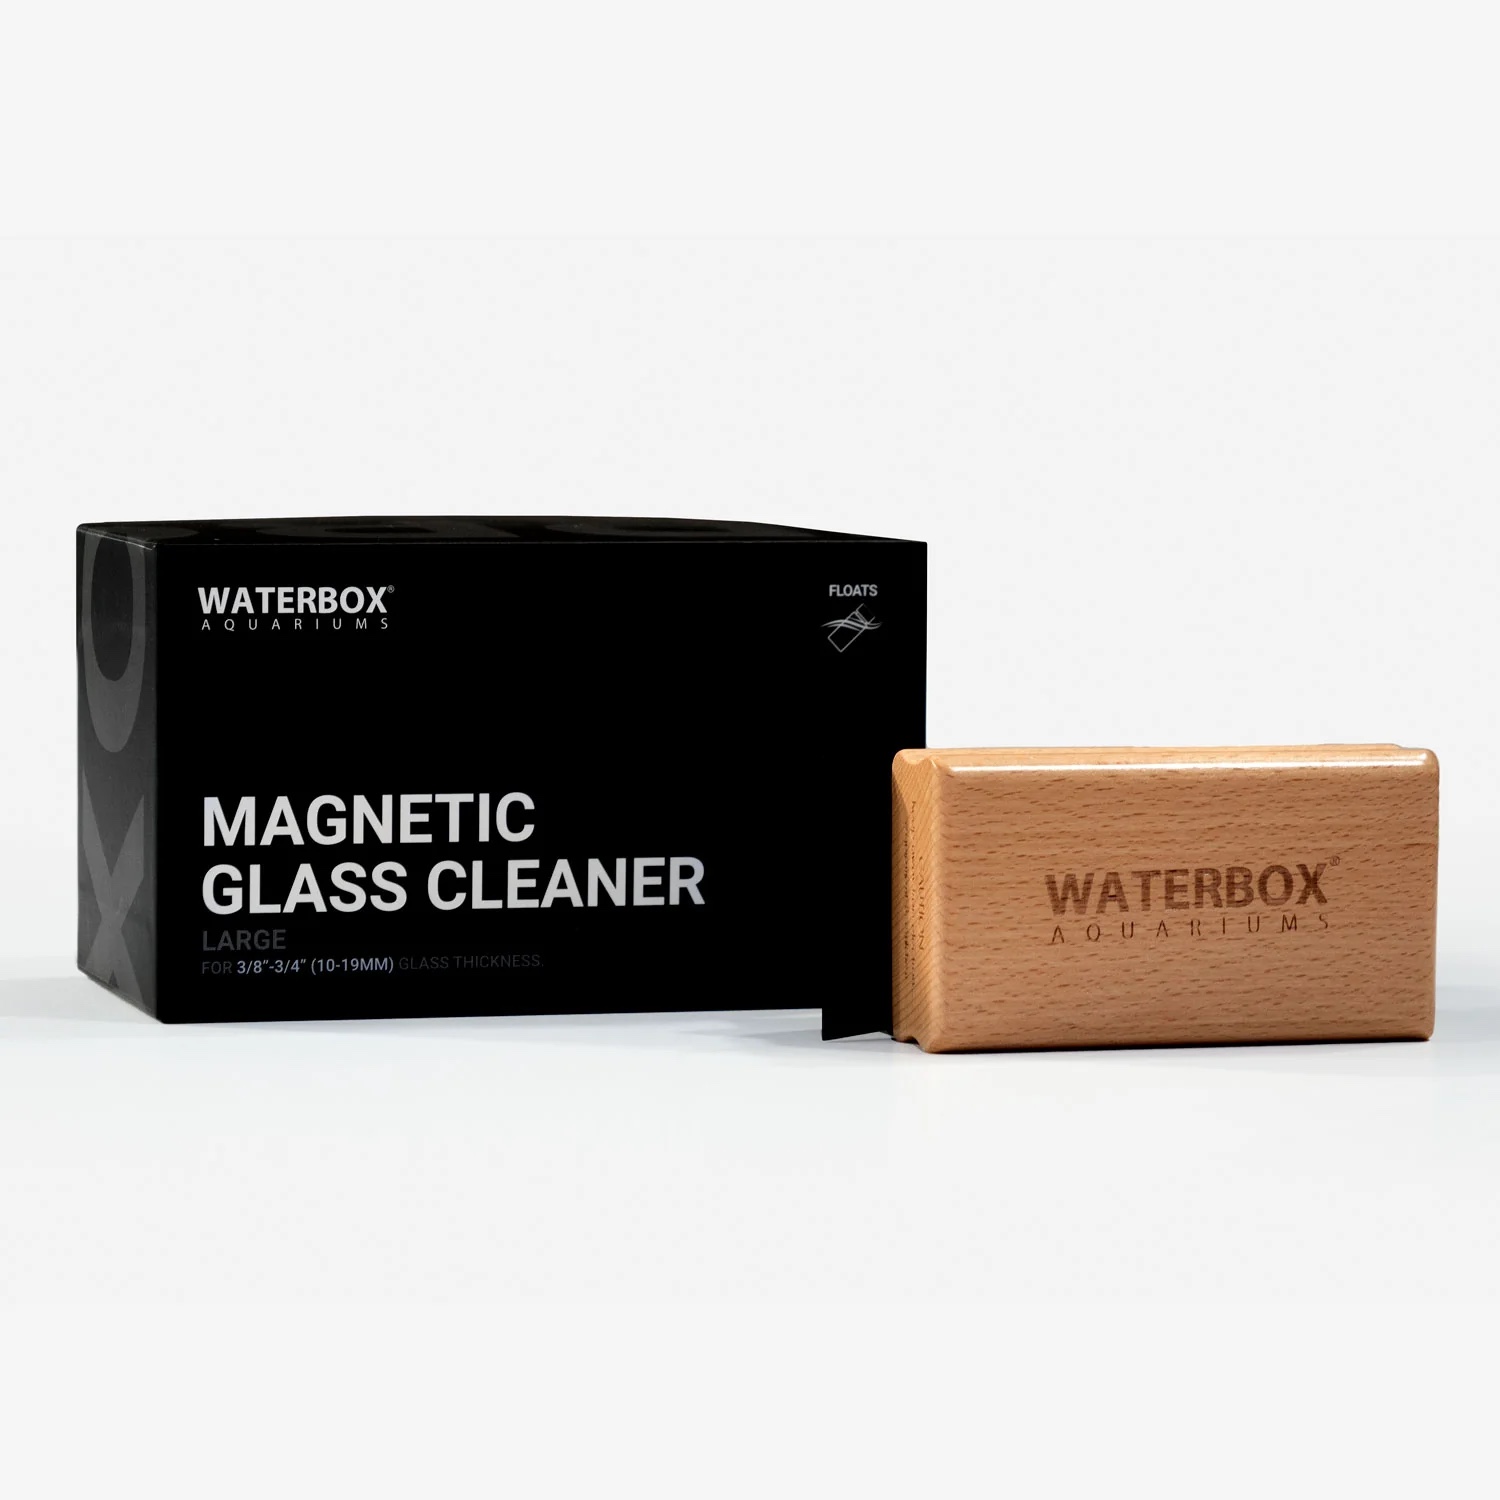 WaterBox Magnetic Cleaner for 12-19mm glass